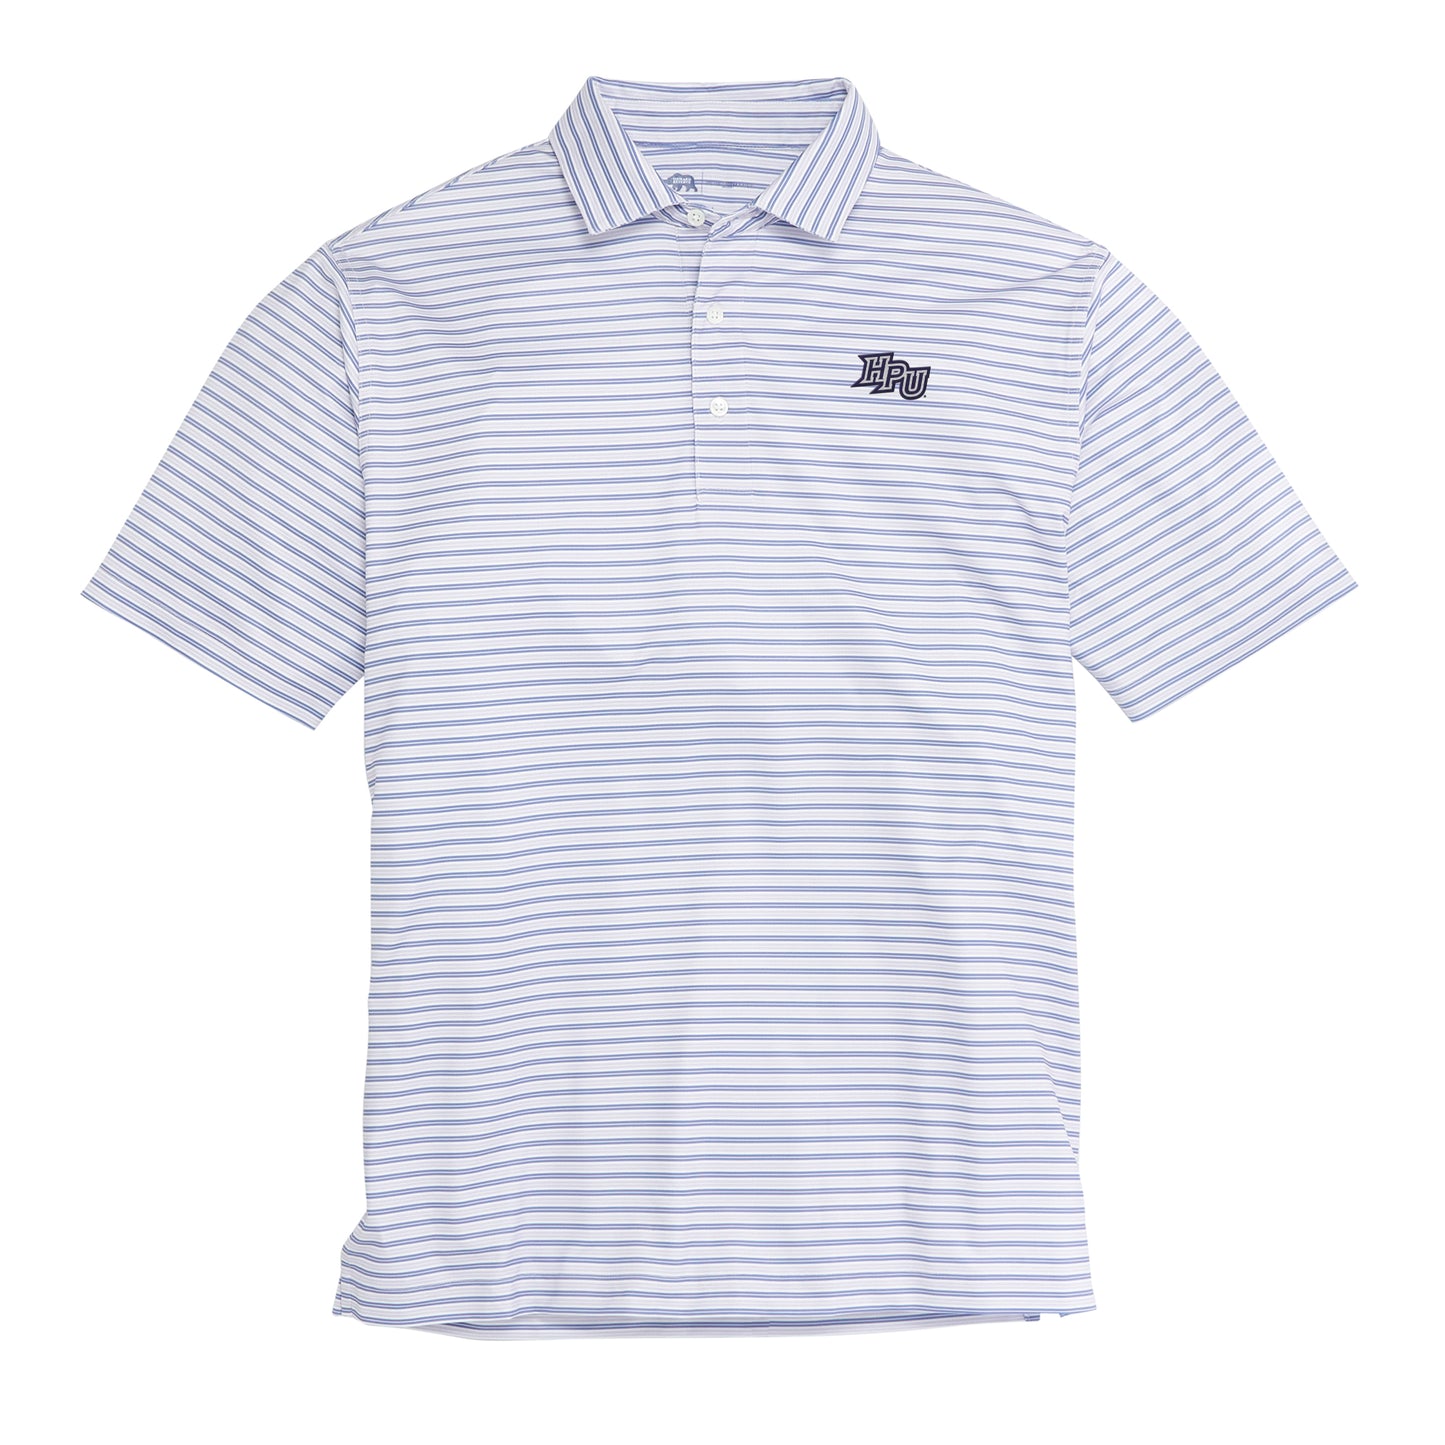 Wedge Stripe High Point Performance Polo